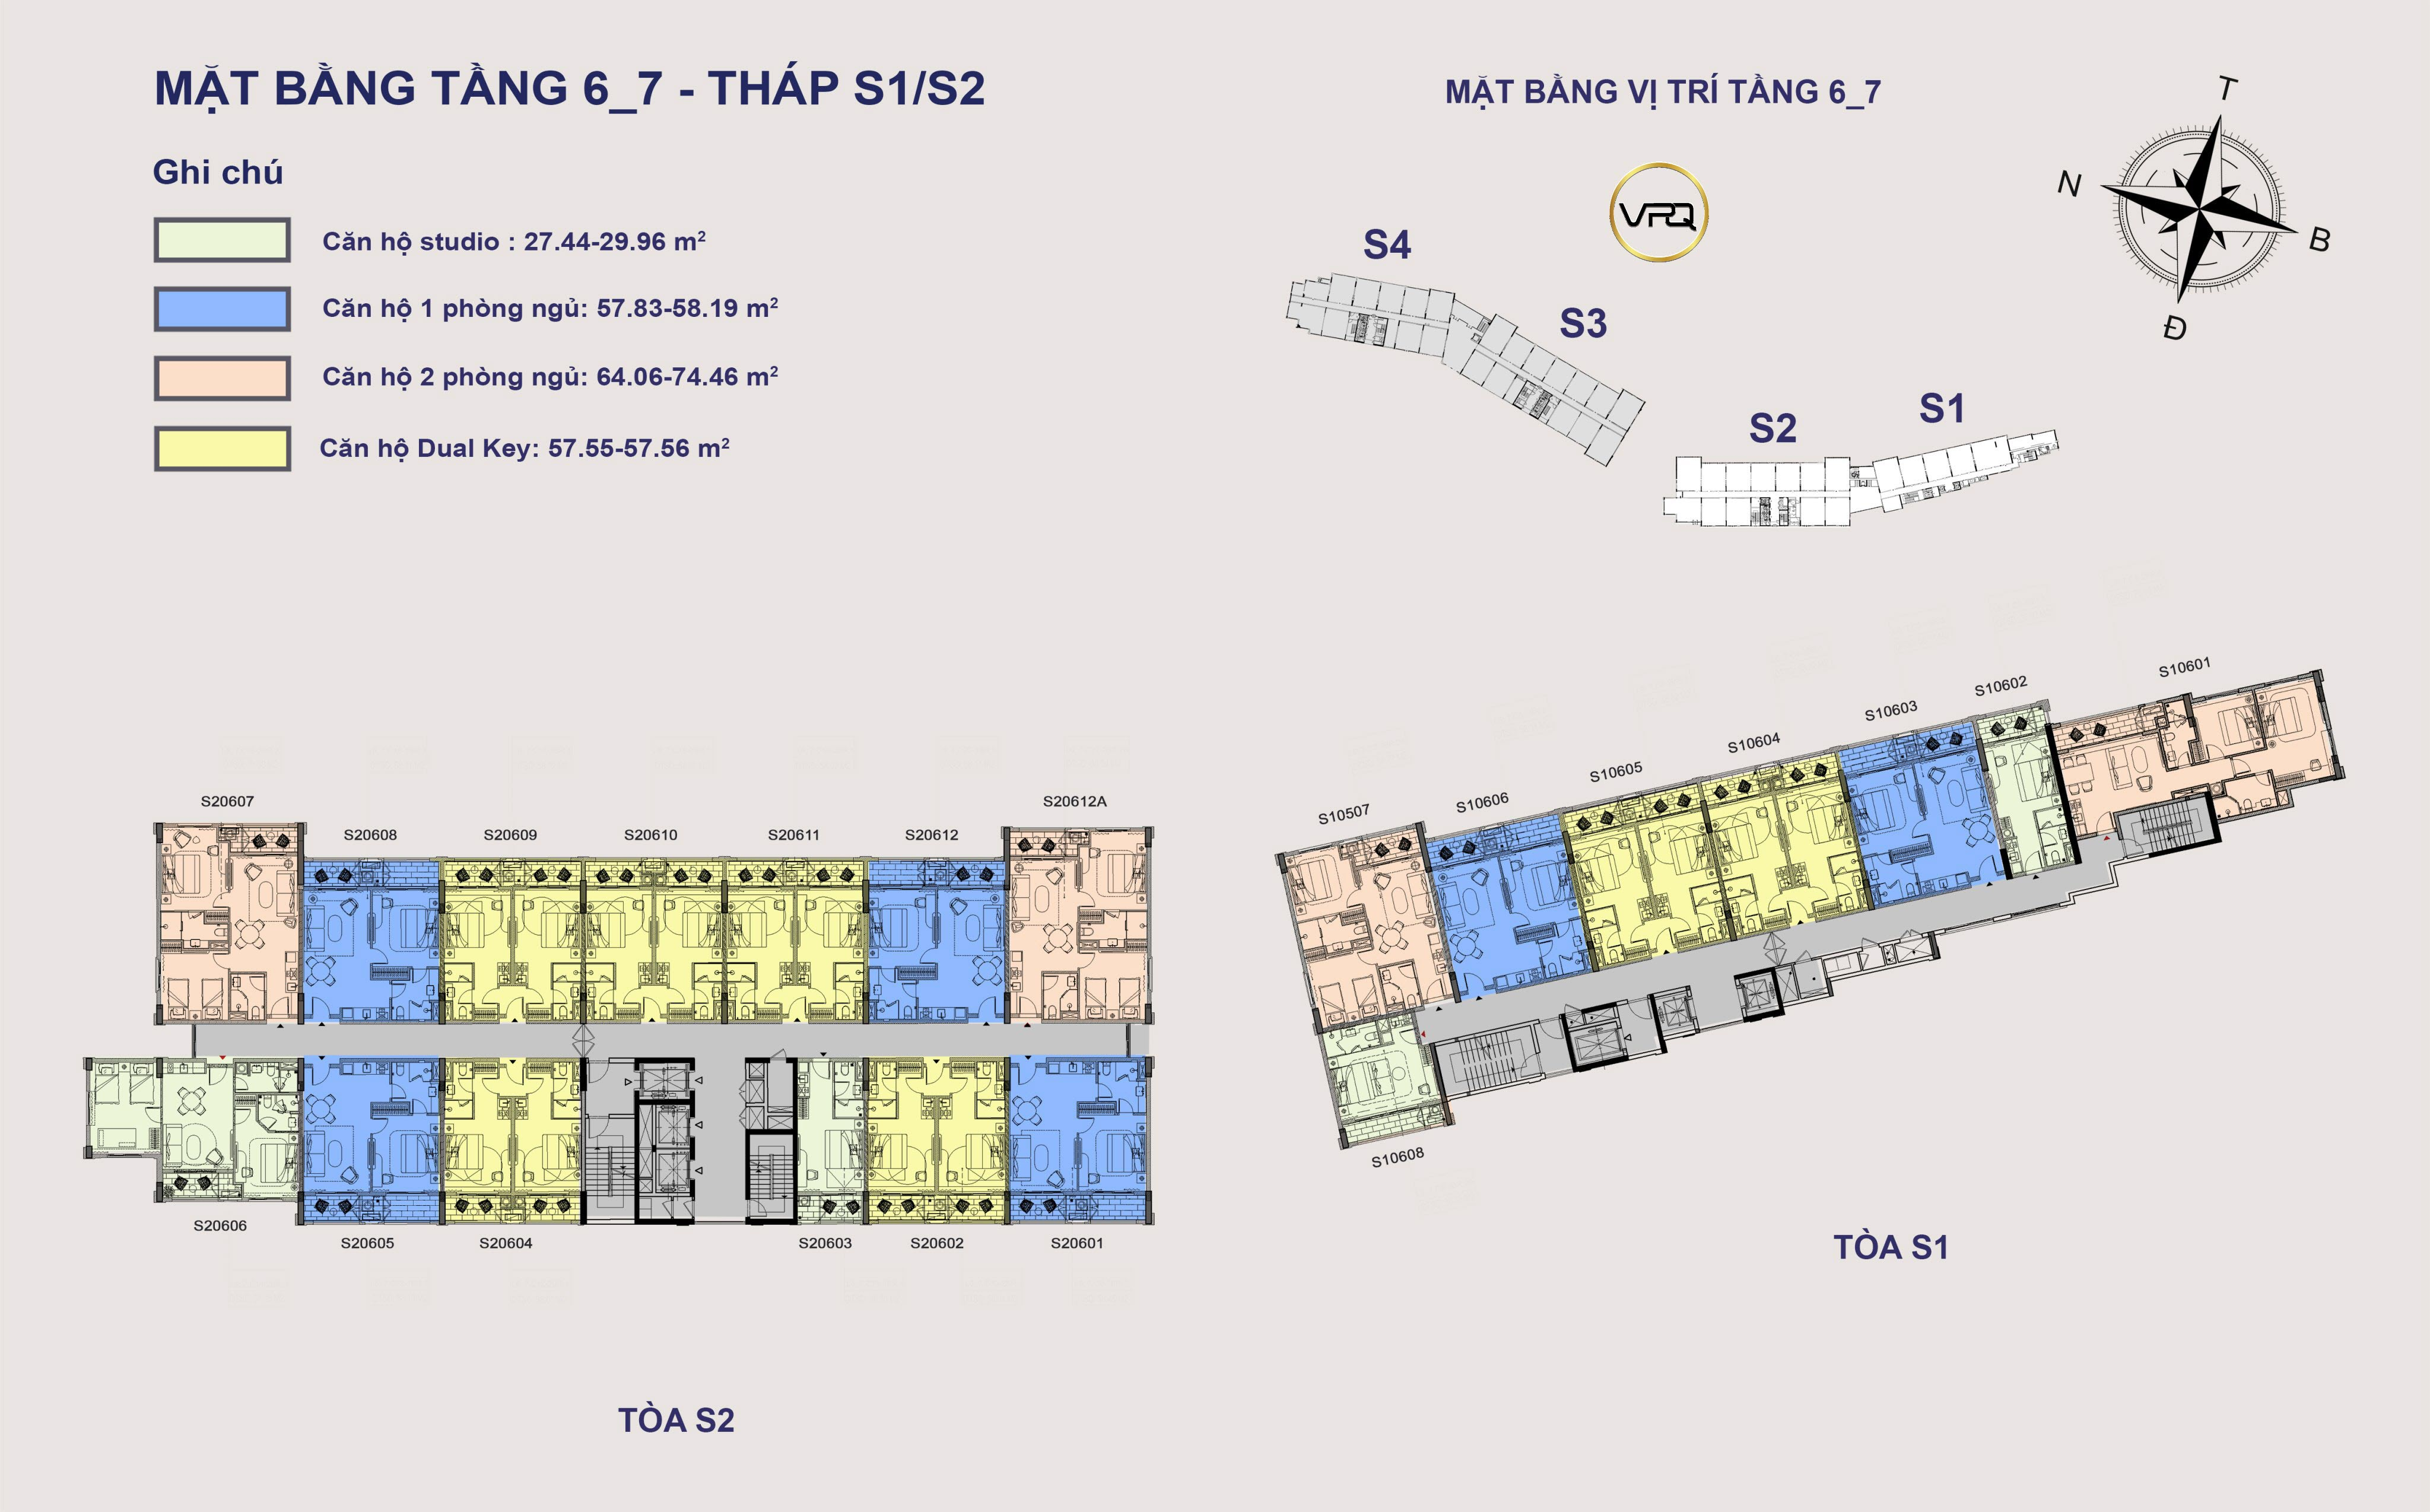 Layout mặt bằng tầng 6 + 7 The Sea Hillside tháp S1/S2